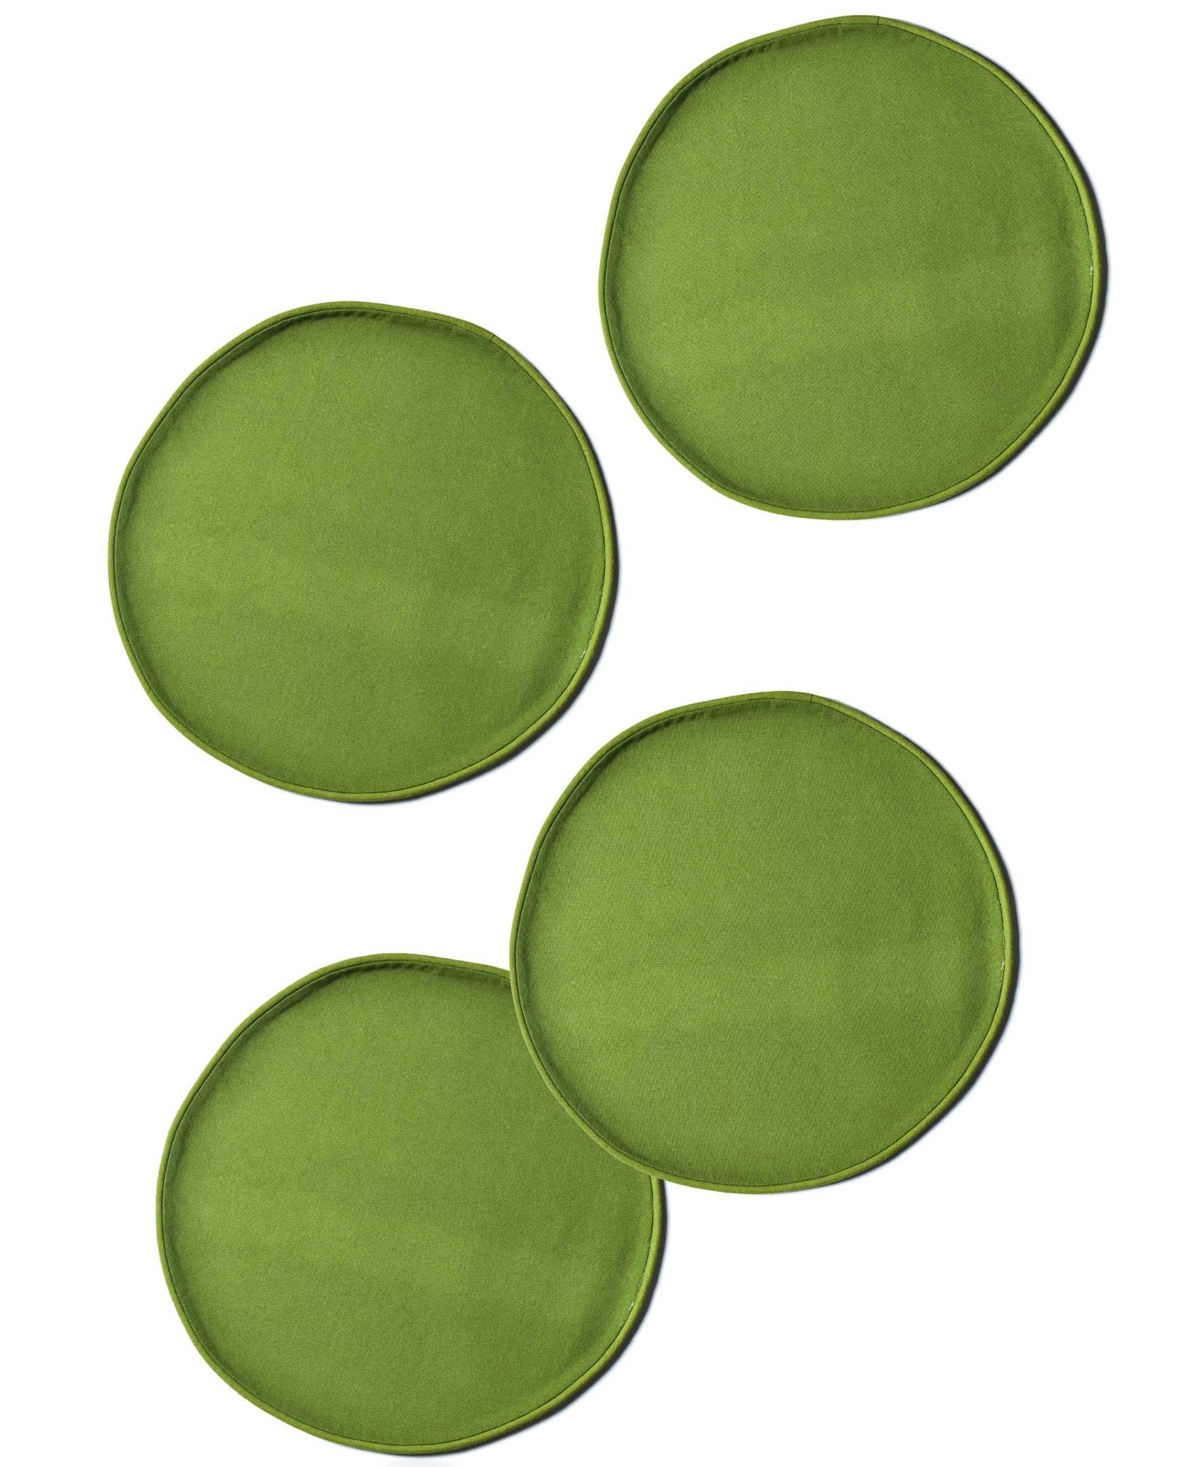 Coton Colors Block Round Placemat Set Of 4, Service For 4 In Olive